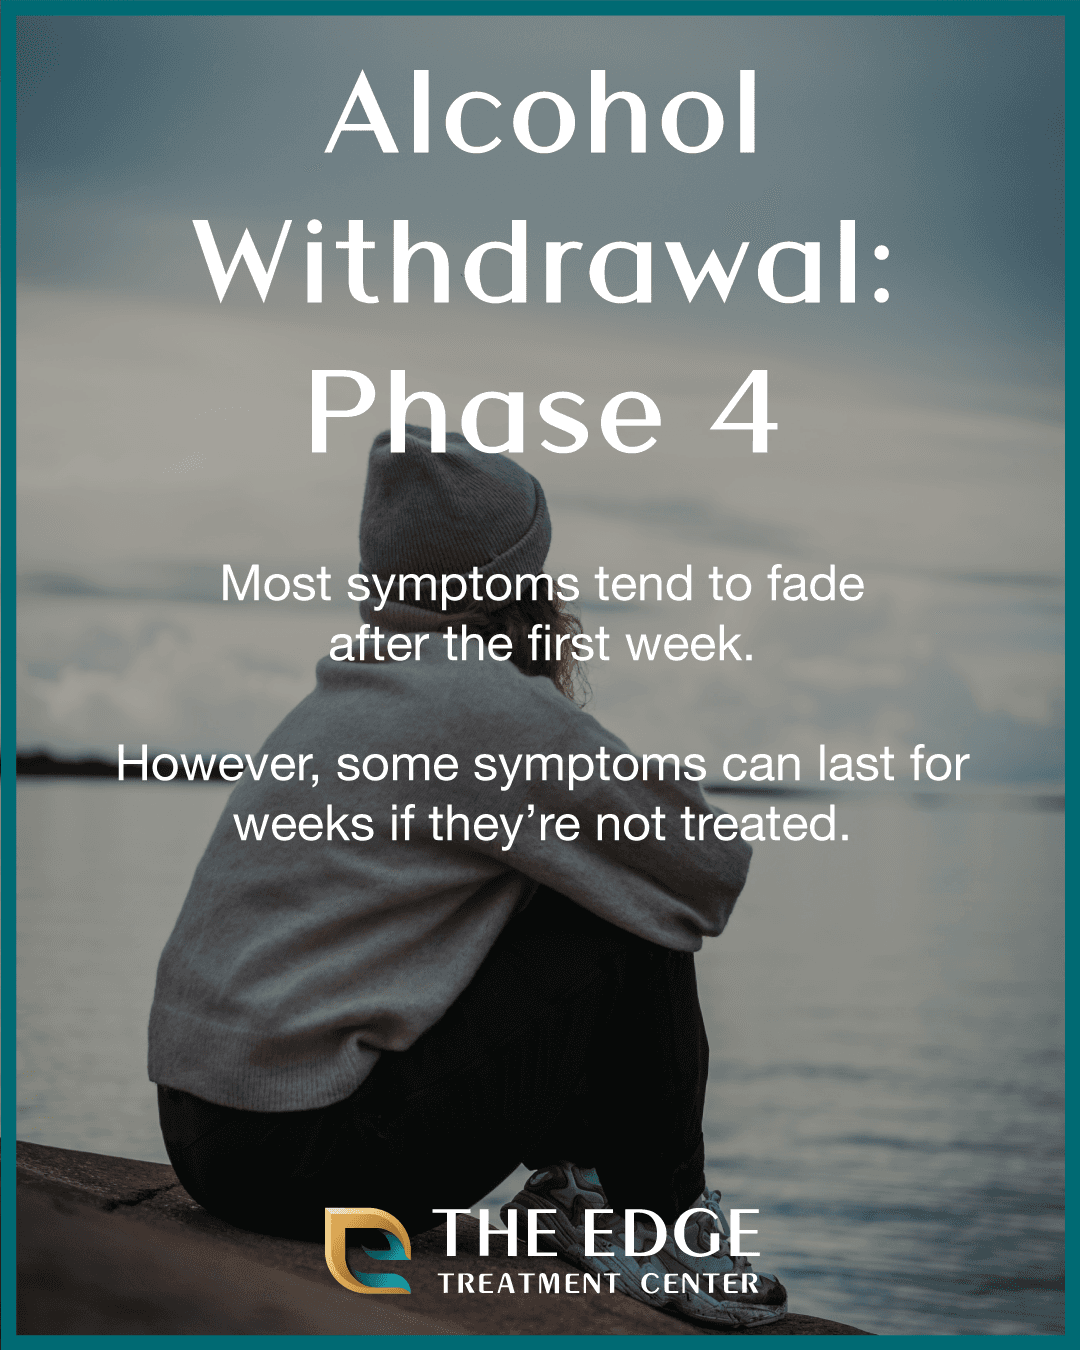 Phase 4 of Alcohol Withdrawal